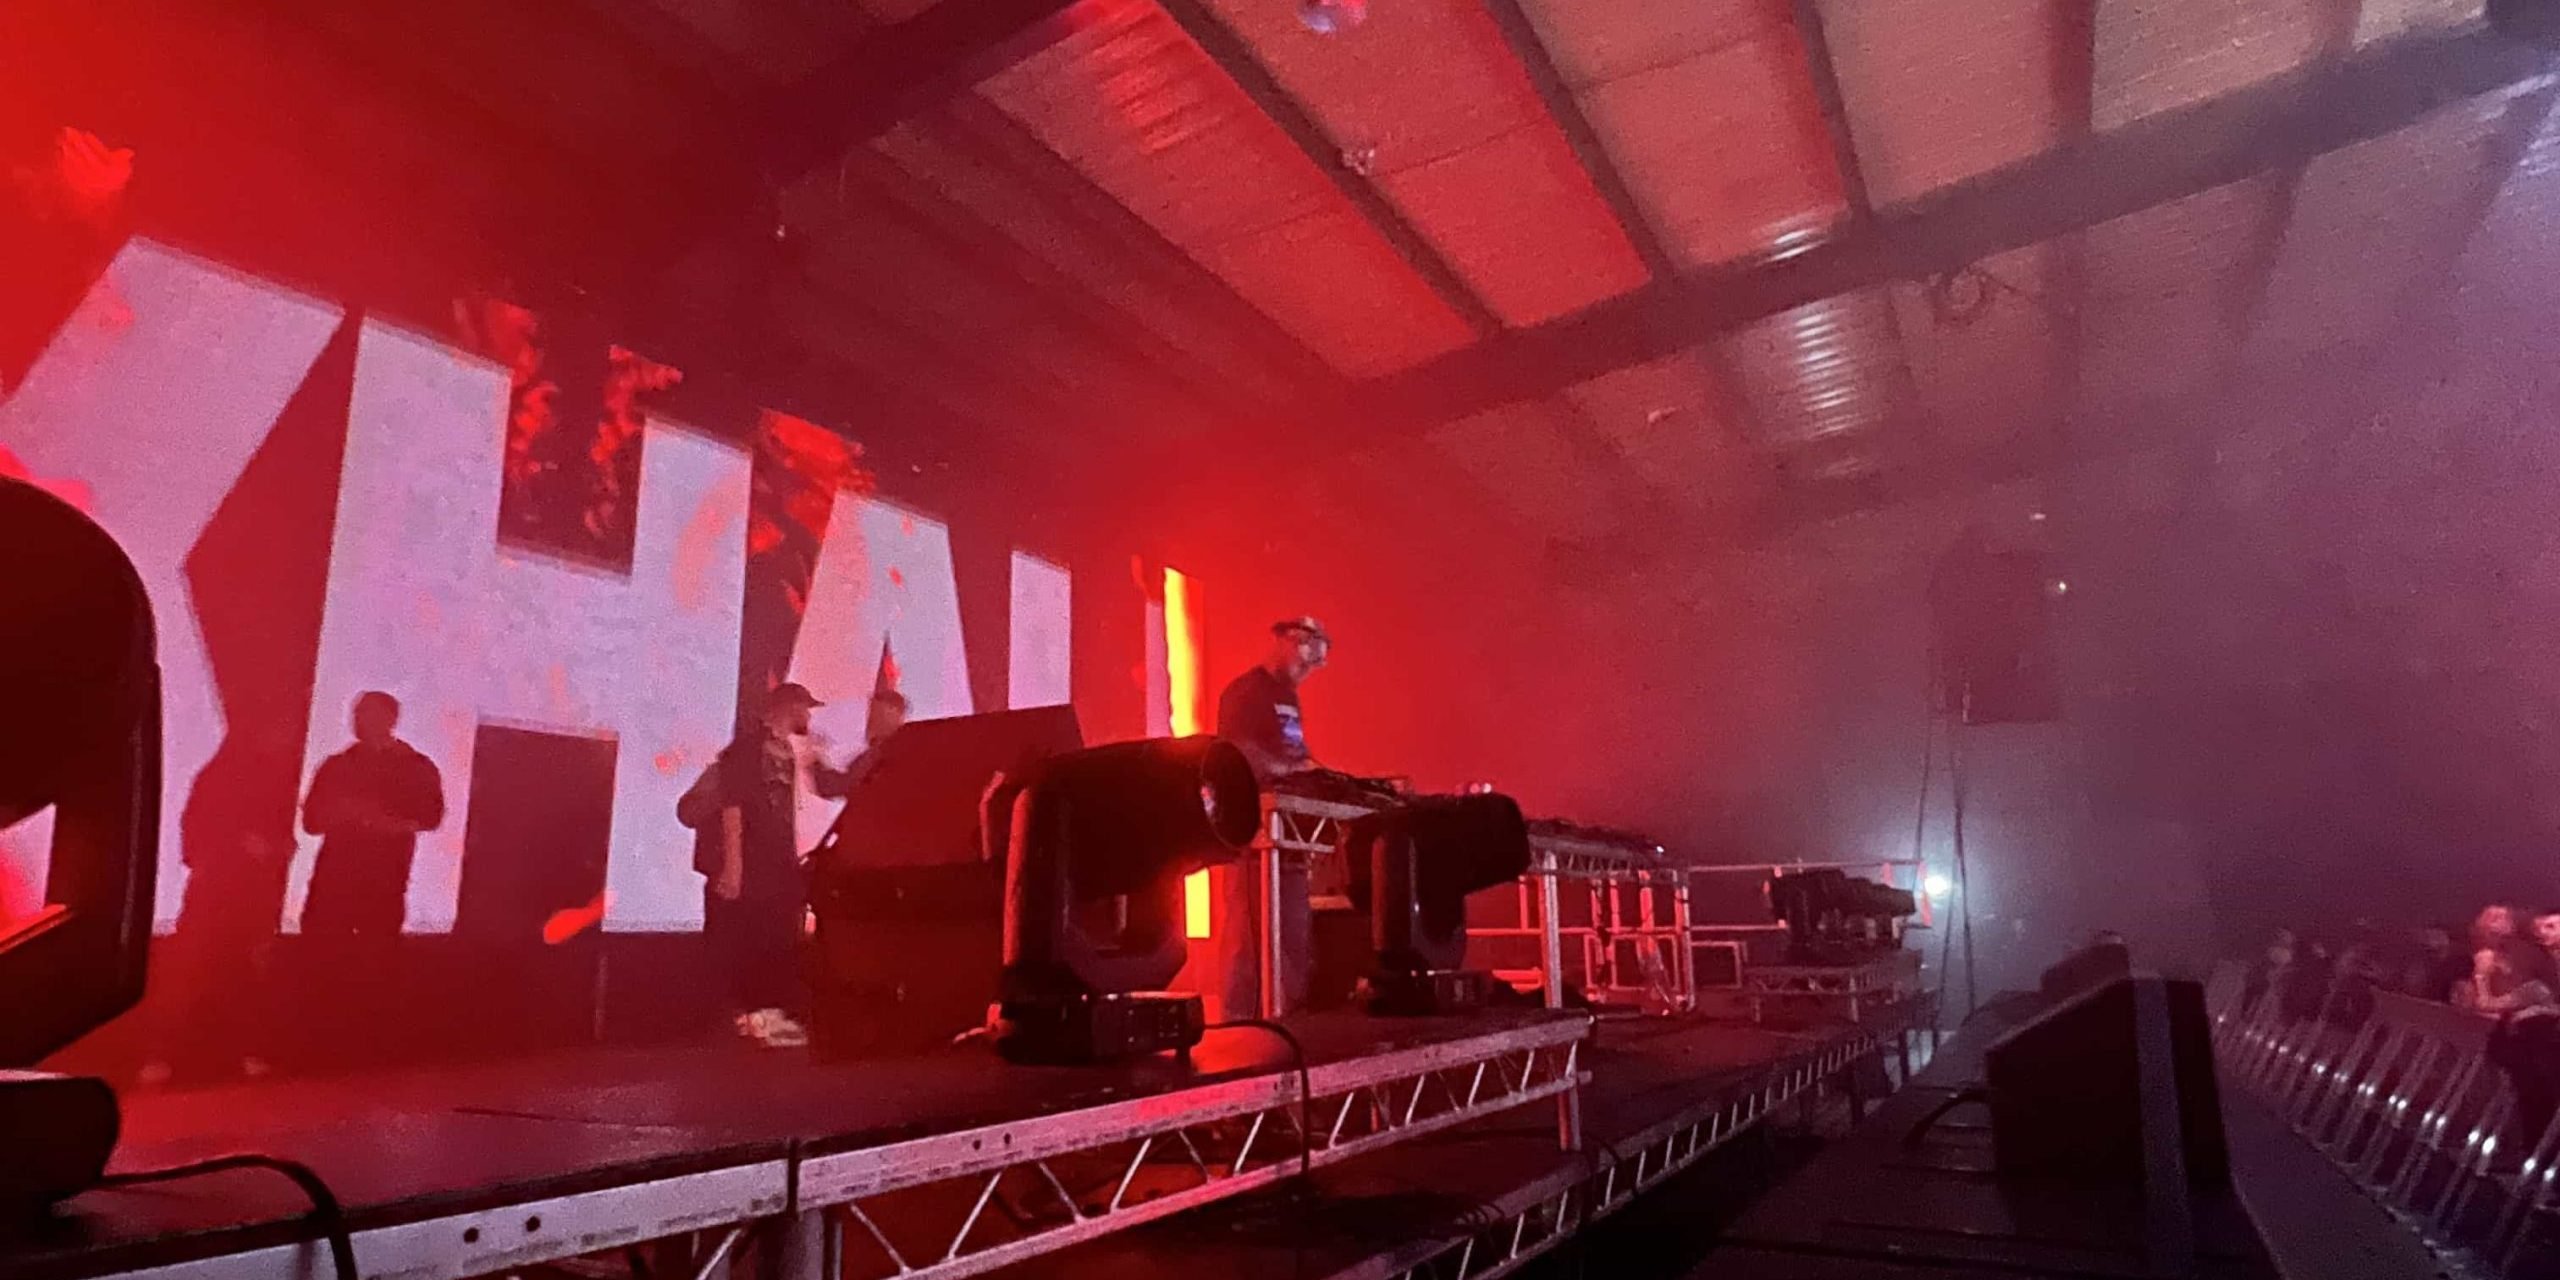 A moody concert setting with vivid red lighting hire and silhouettes of people, with the word 